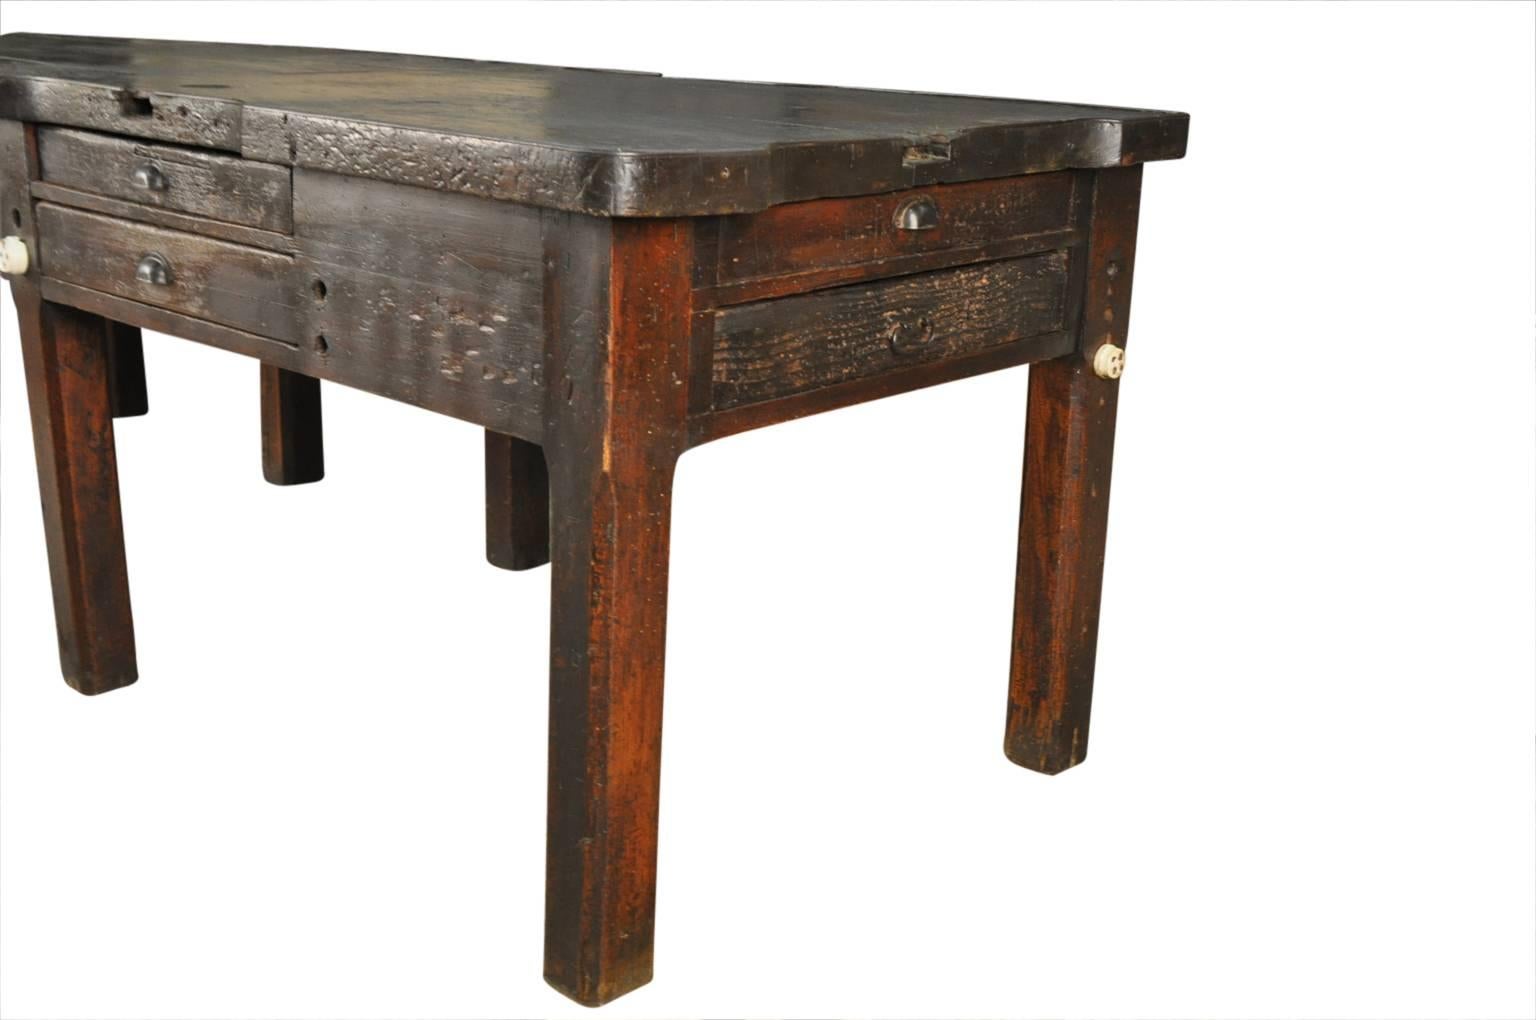 Beech Monumental 19th Century French Jeweler's Work Table